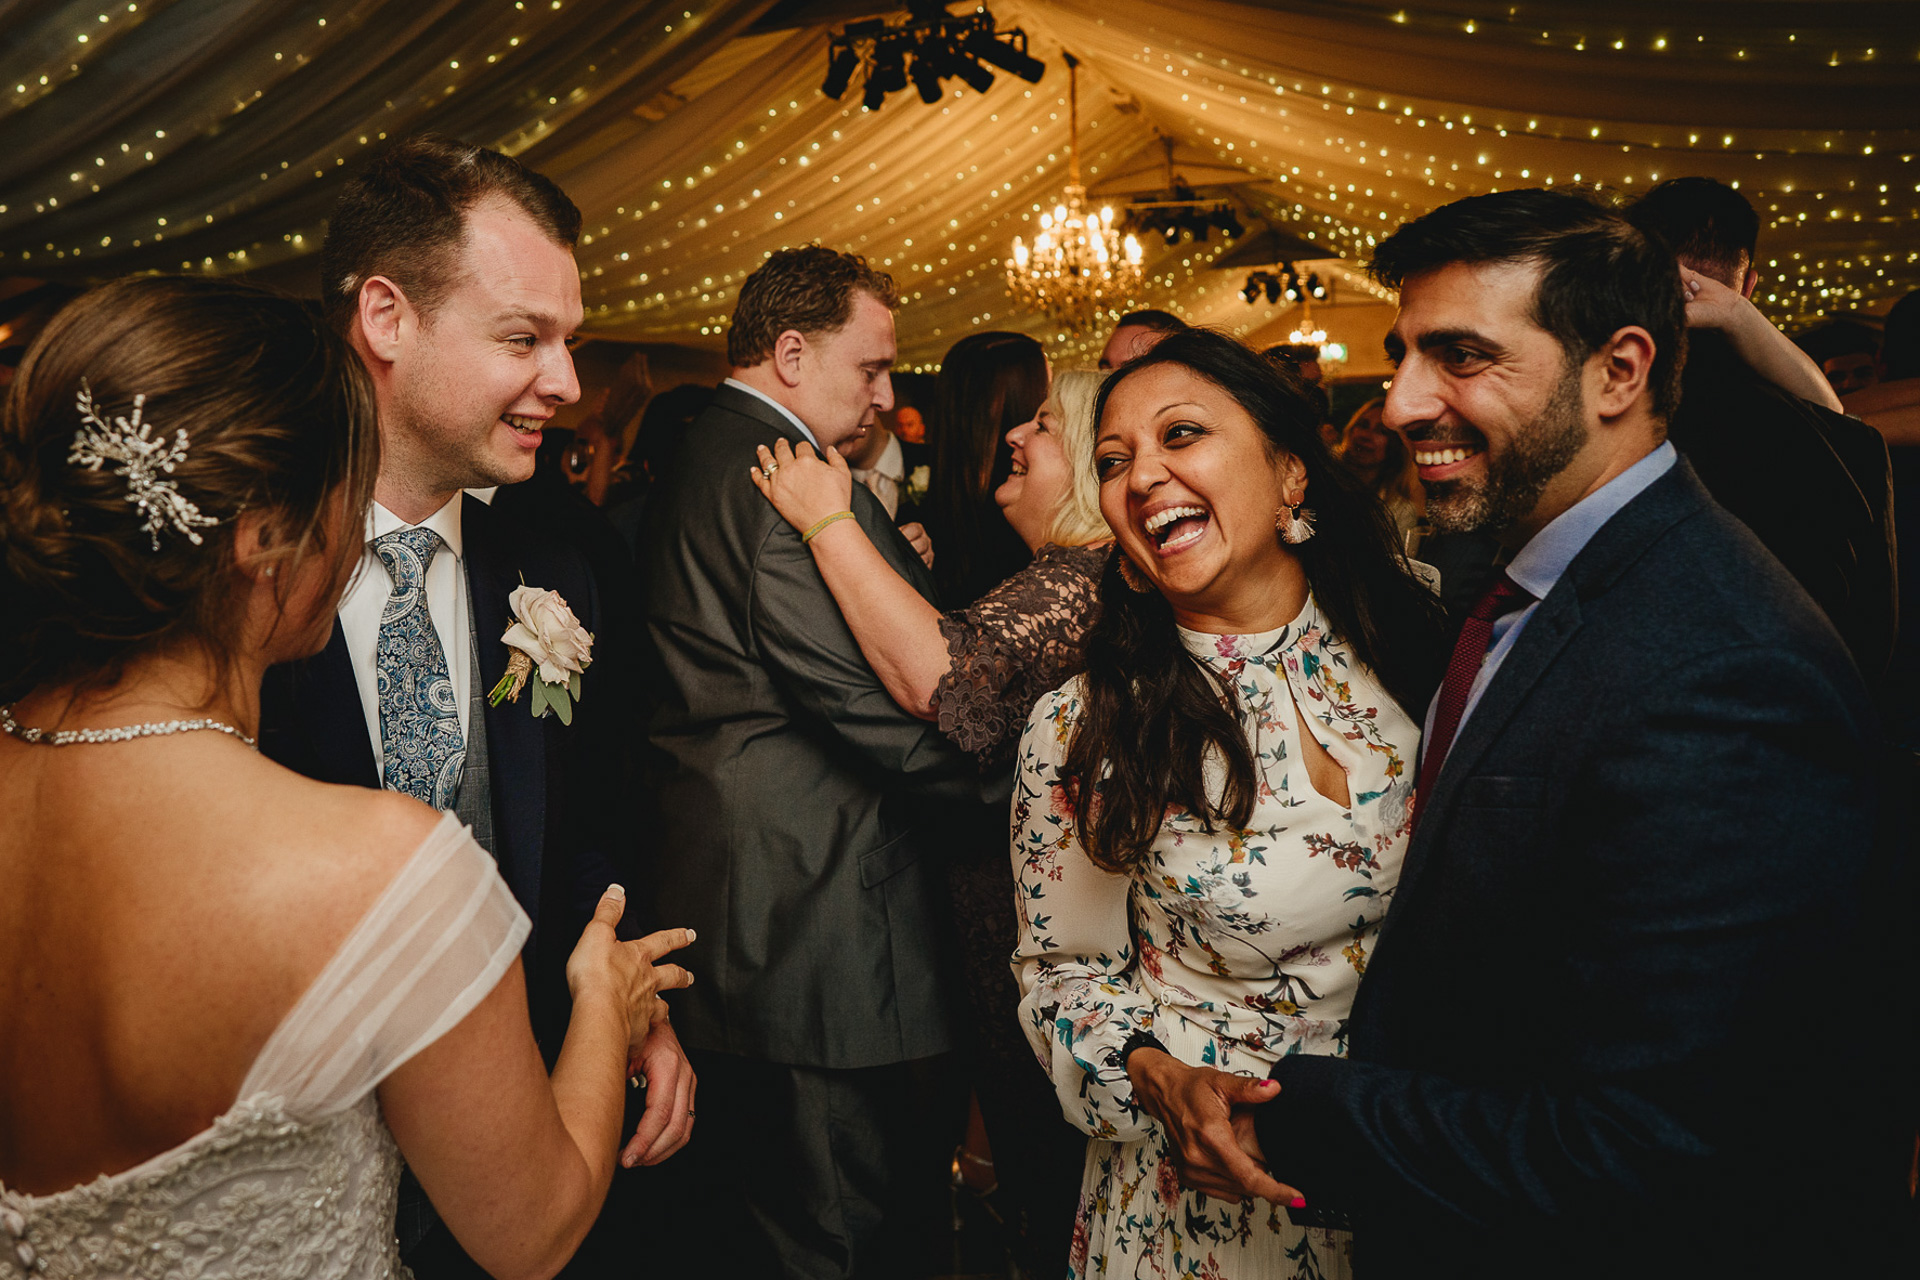 Wedding guests laughing on the dance floor